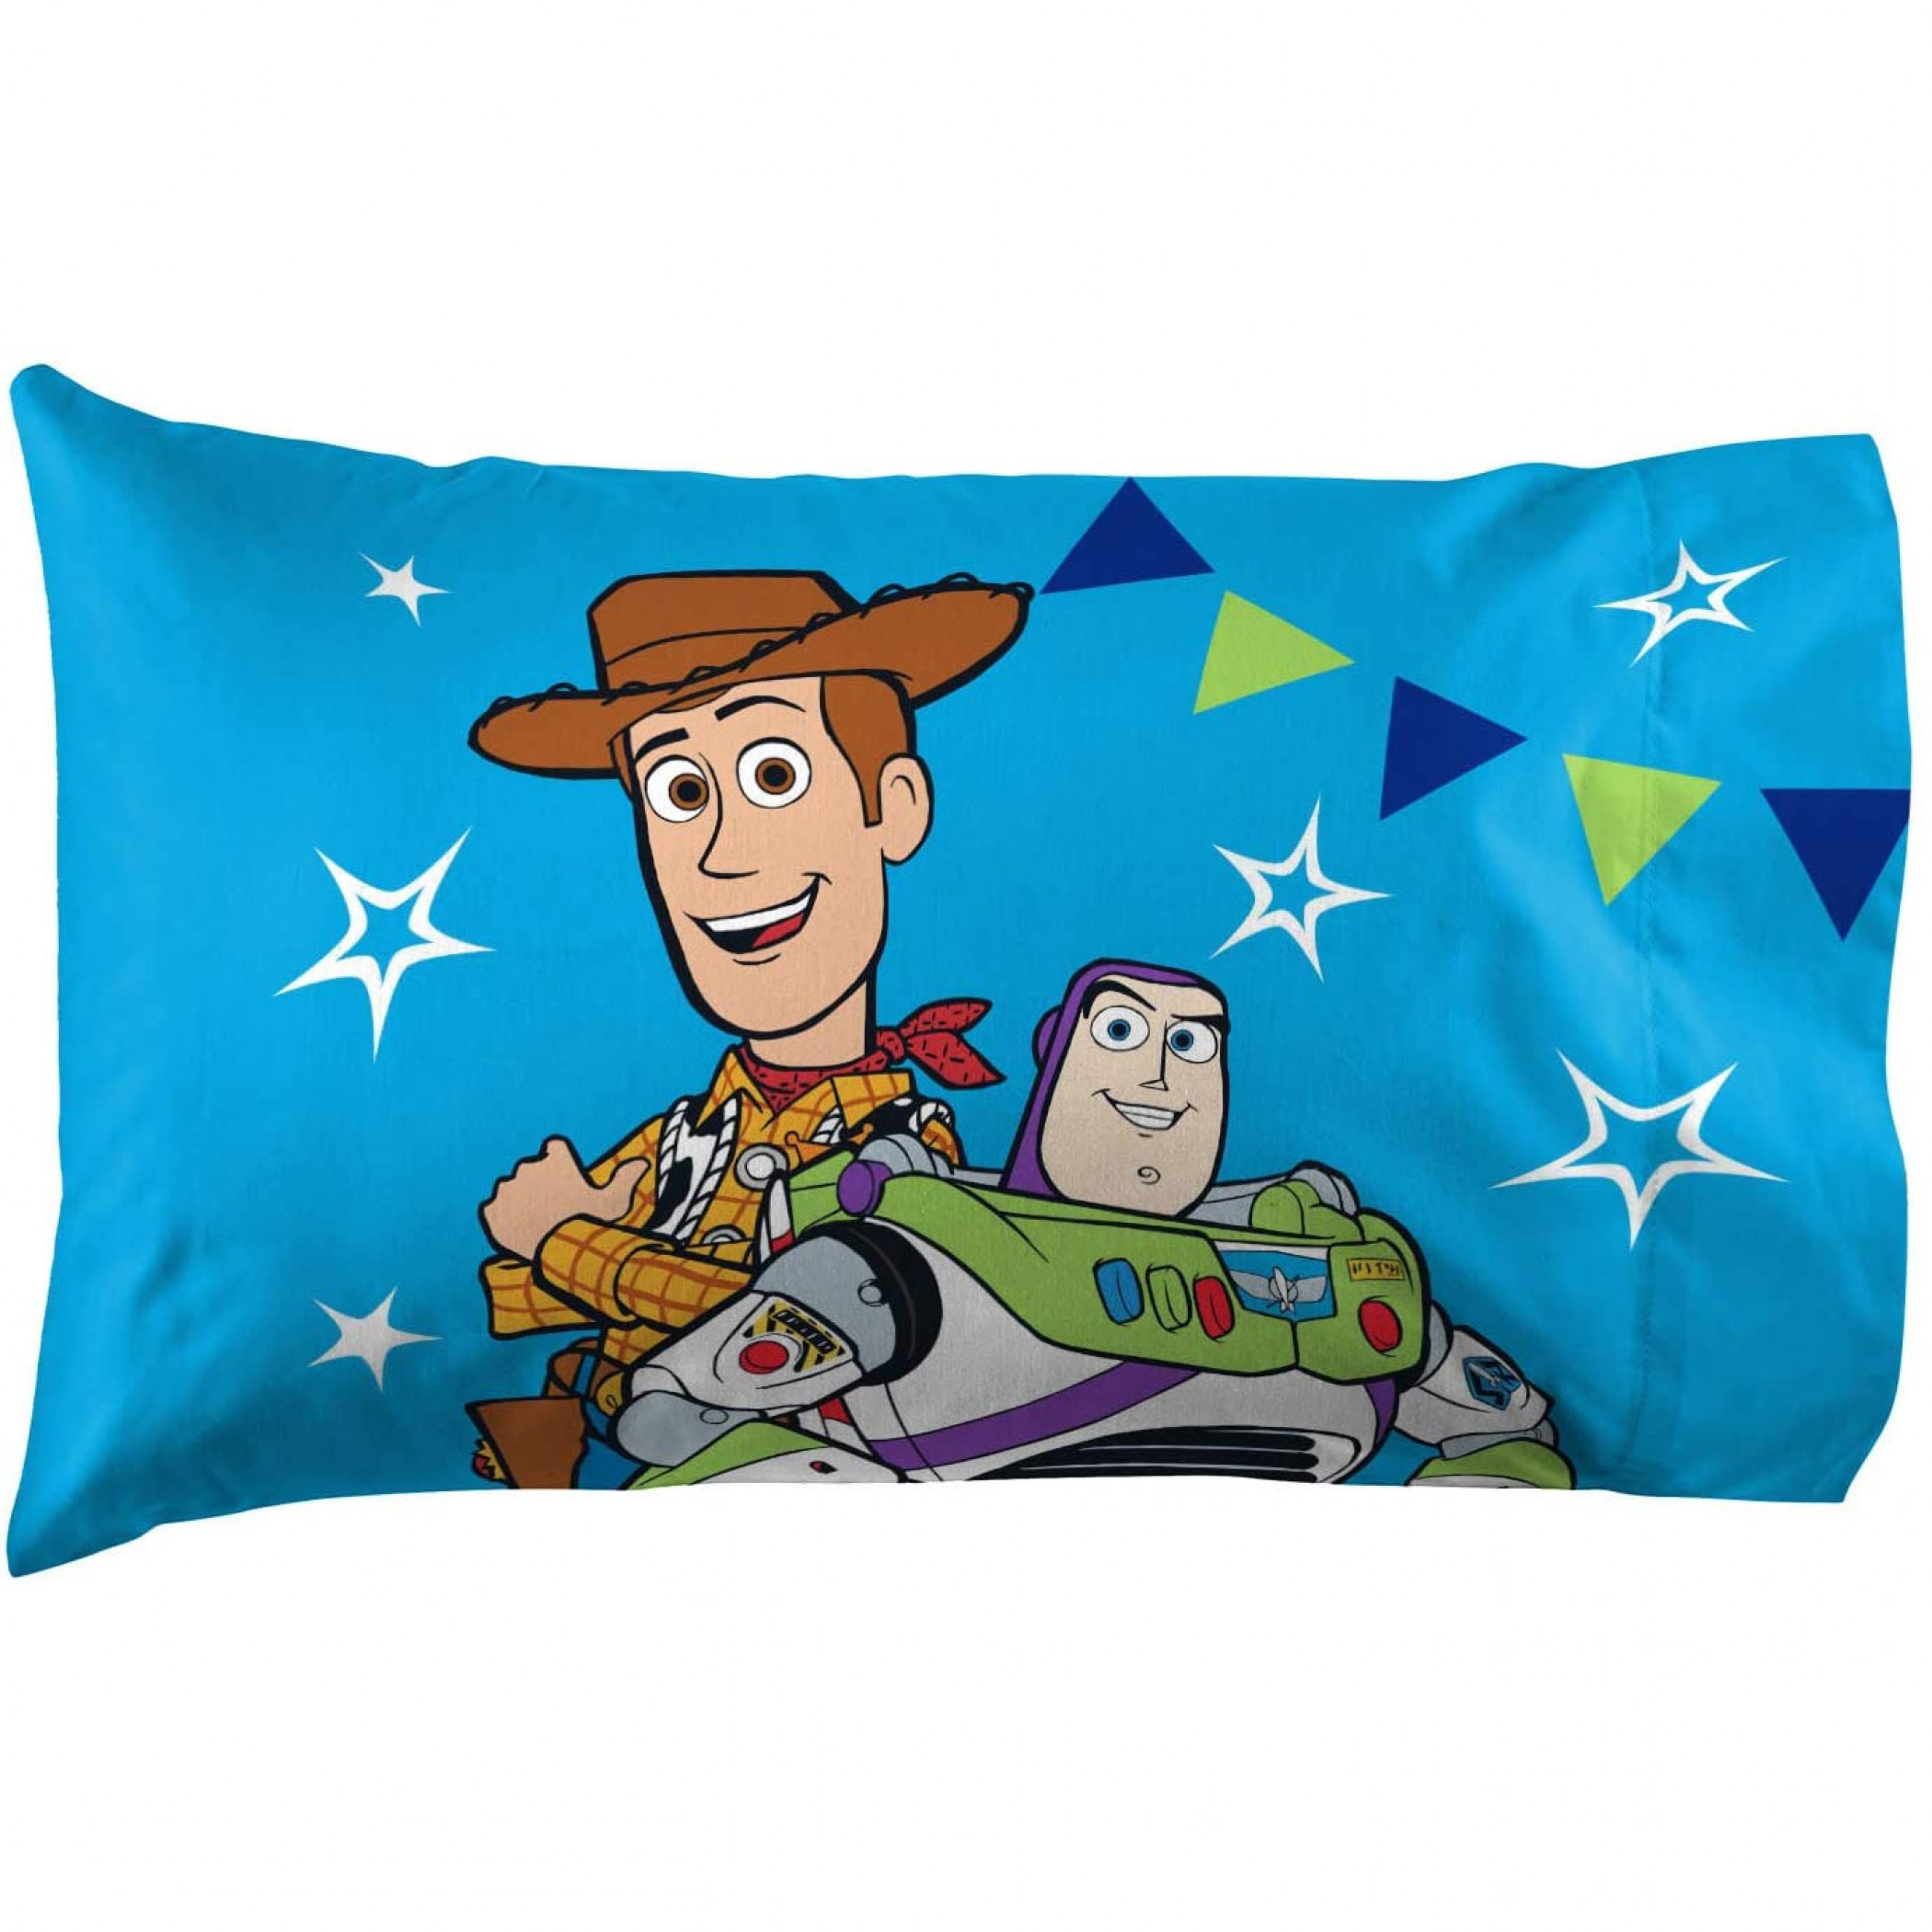 Toy Story "Buzz & Woody" Pillow Case